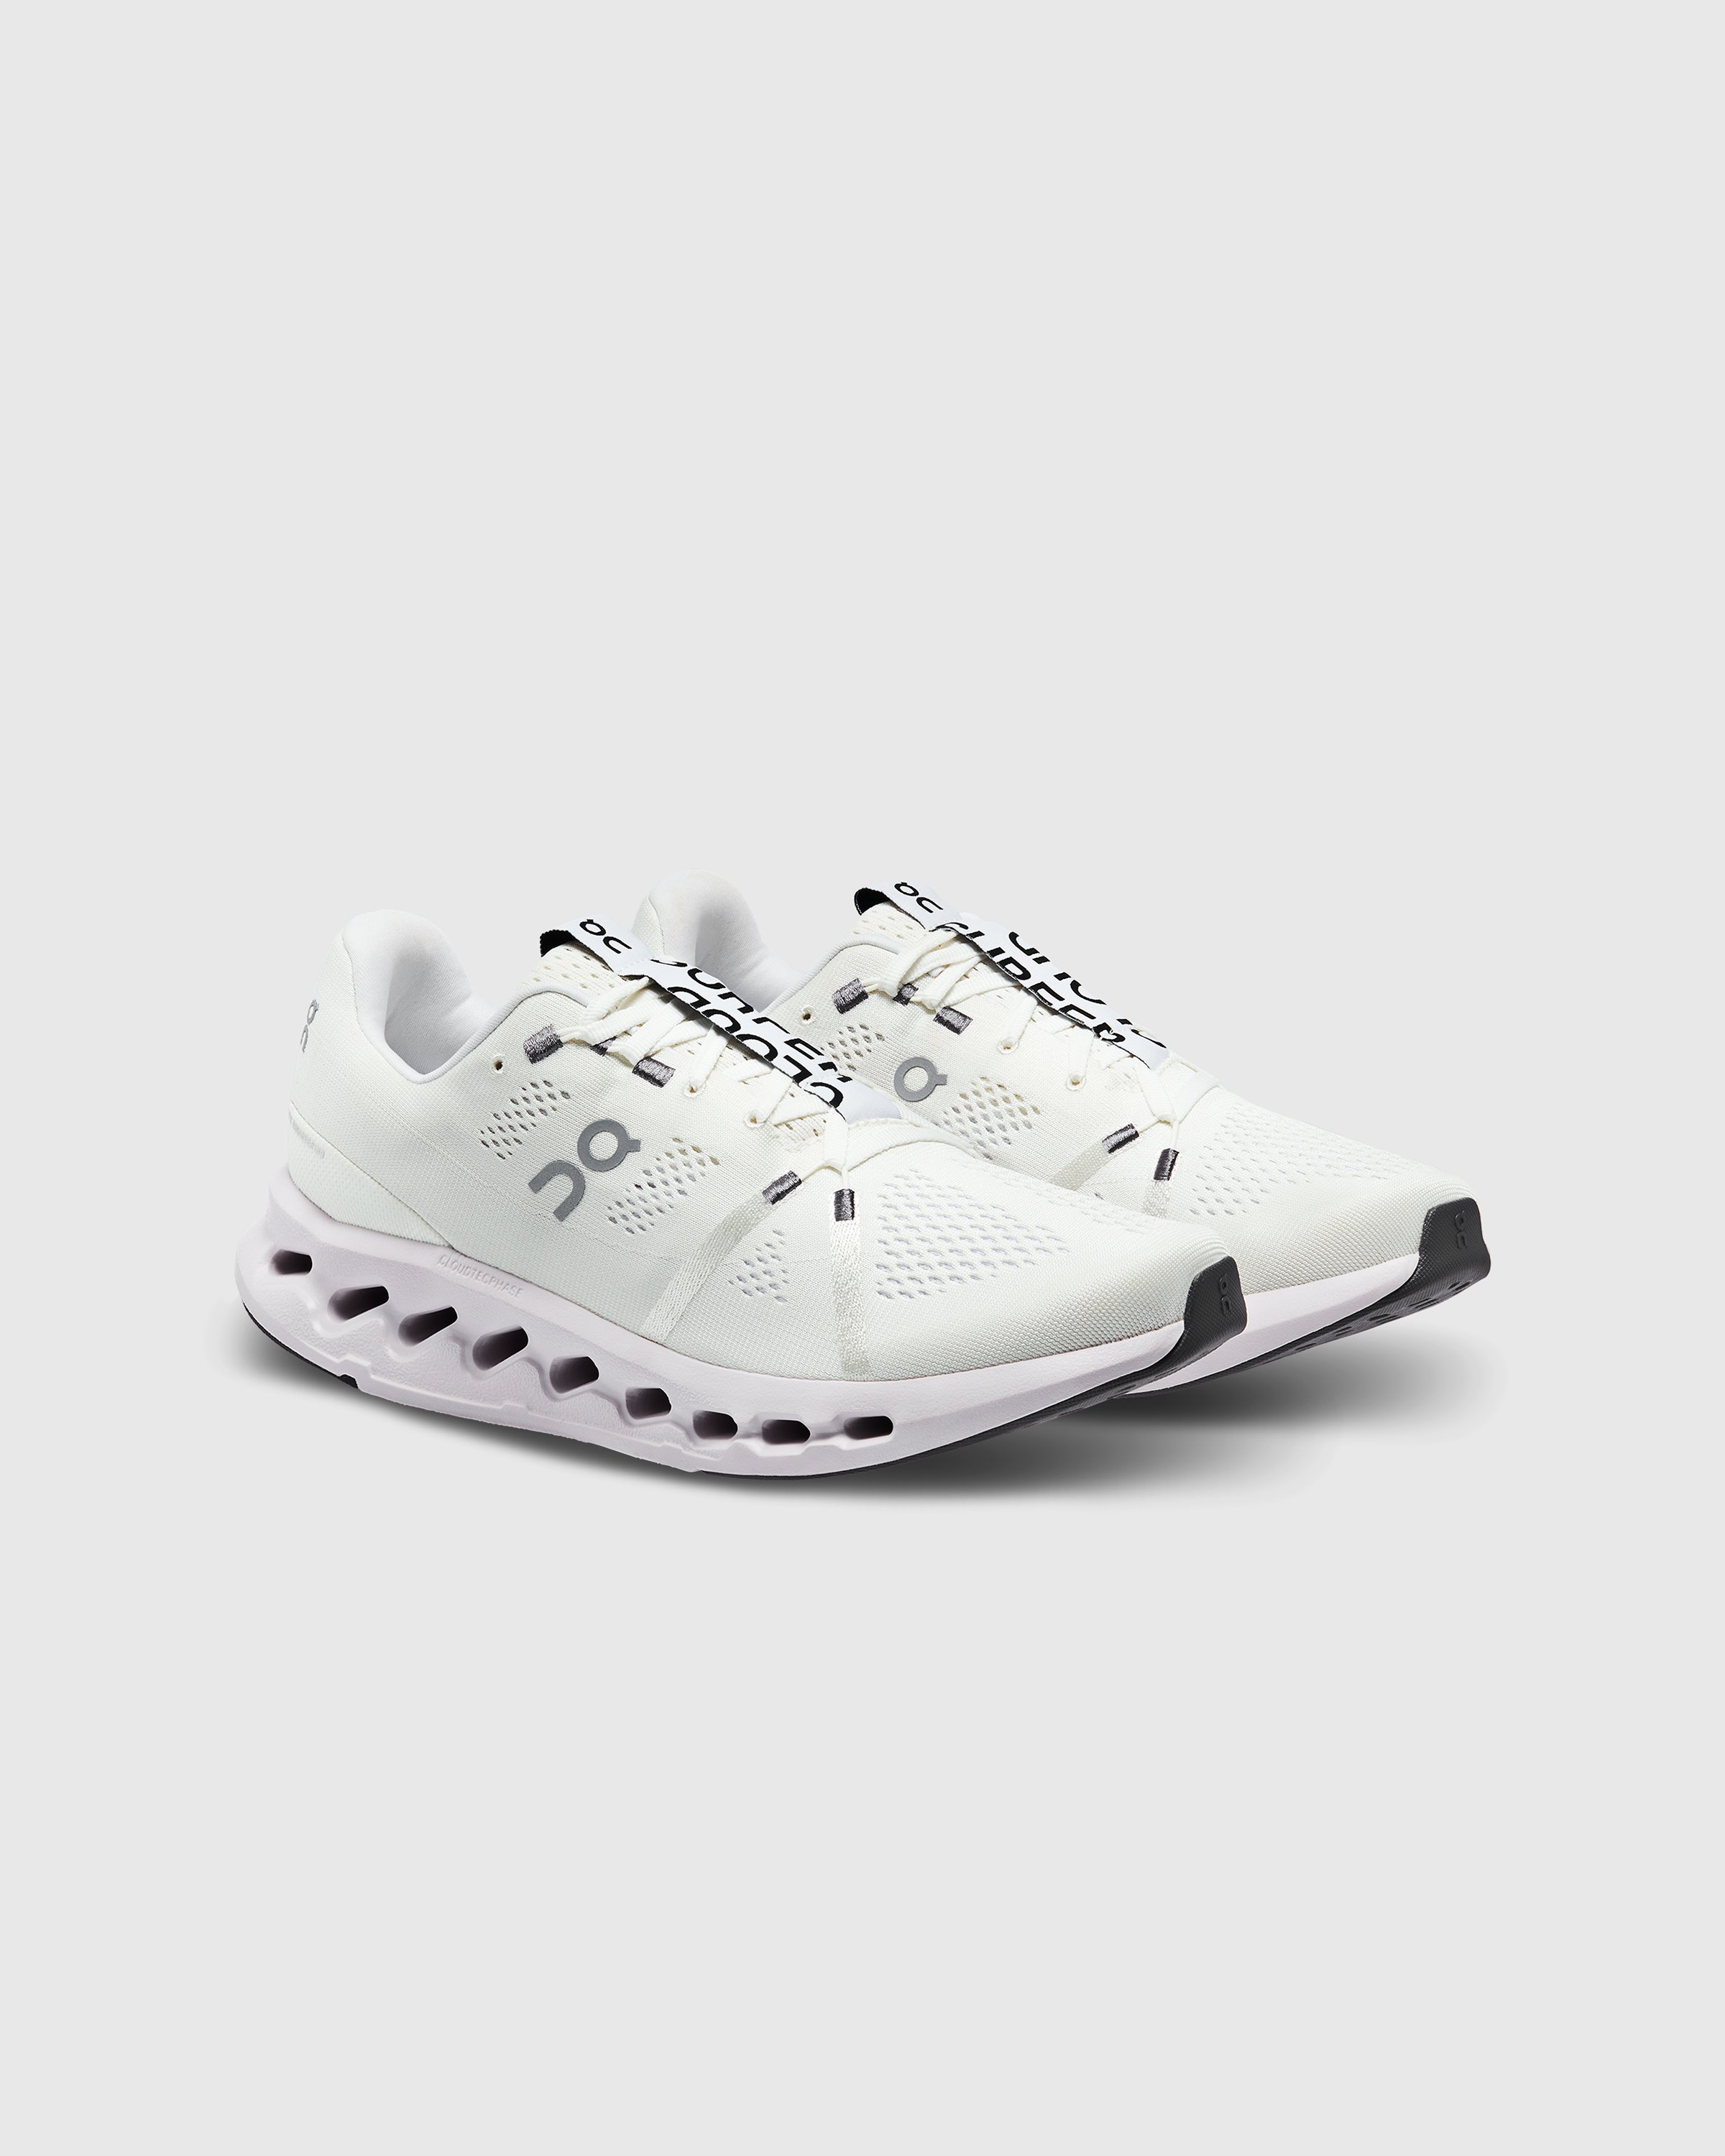 On - Cloudsurfer White/Frost - Footwear - White - Image 3